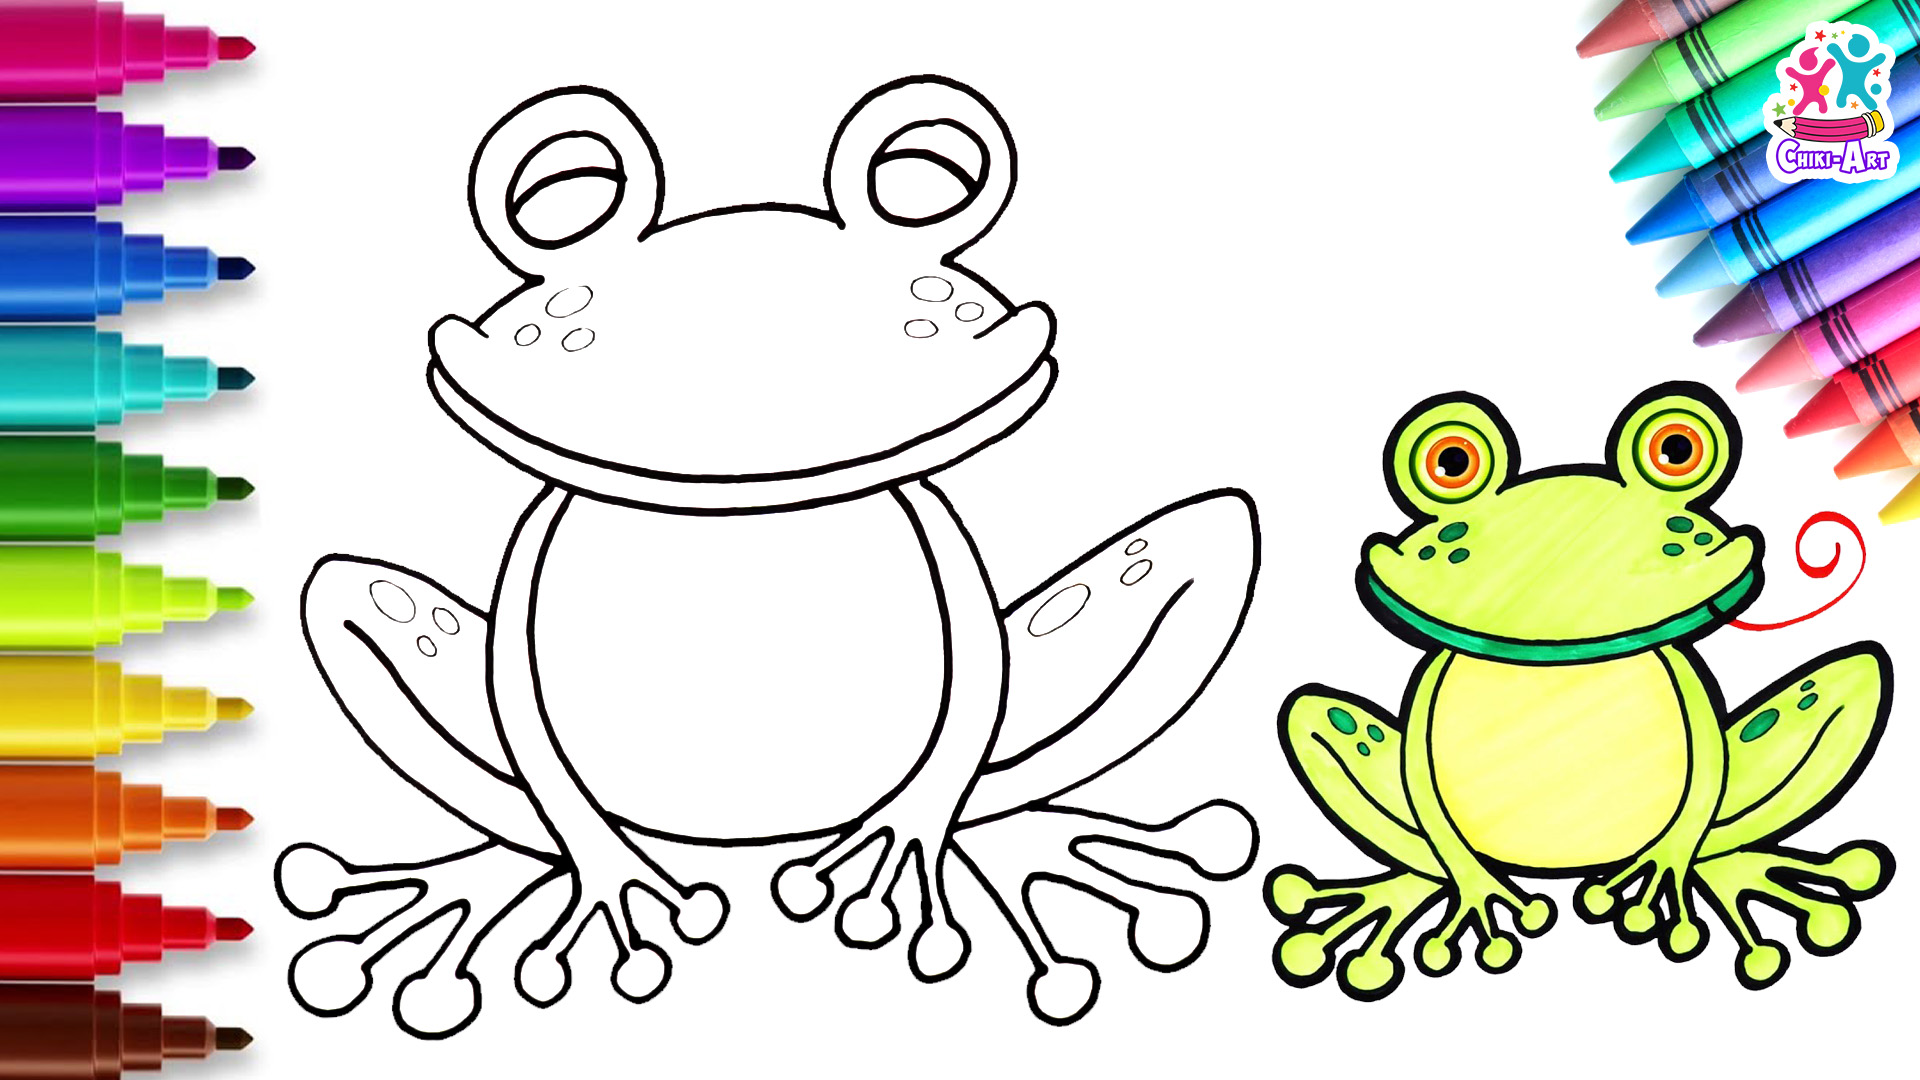 Pepper vegetable coloring page for kids, printable | coloing-4kids.com